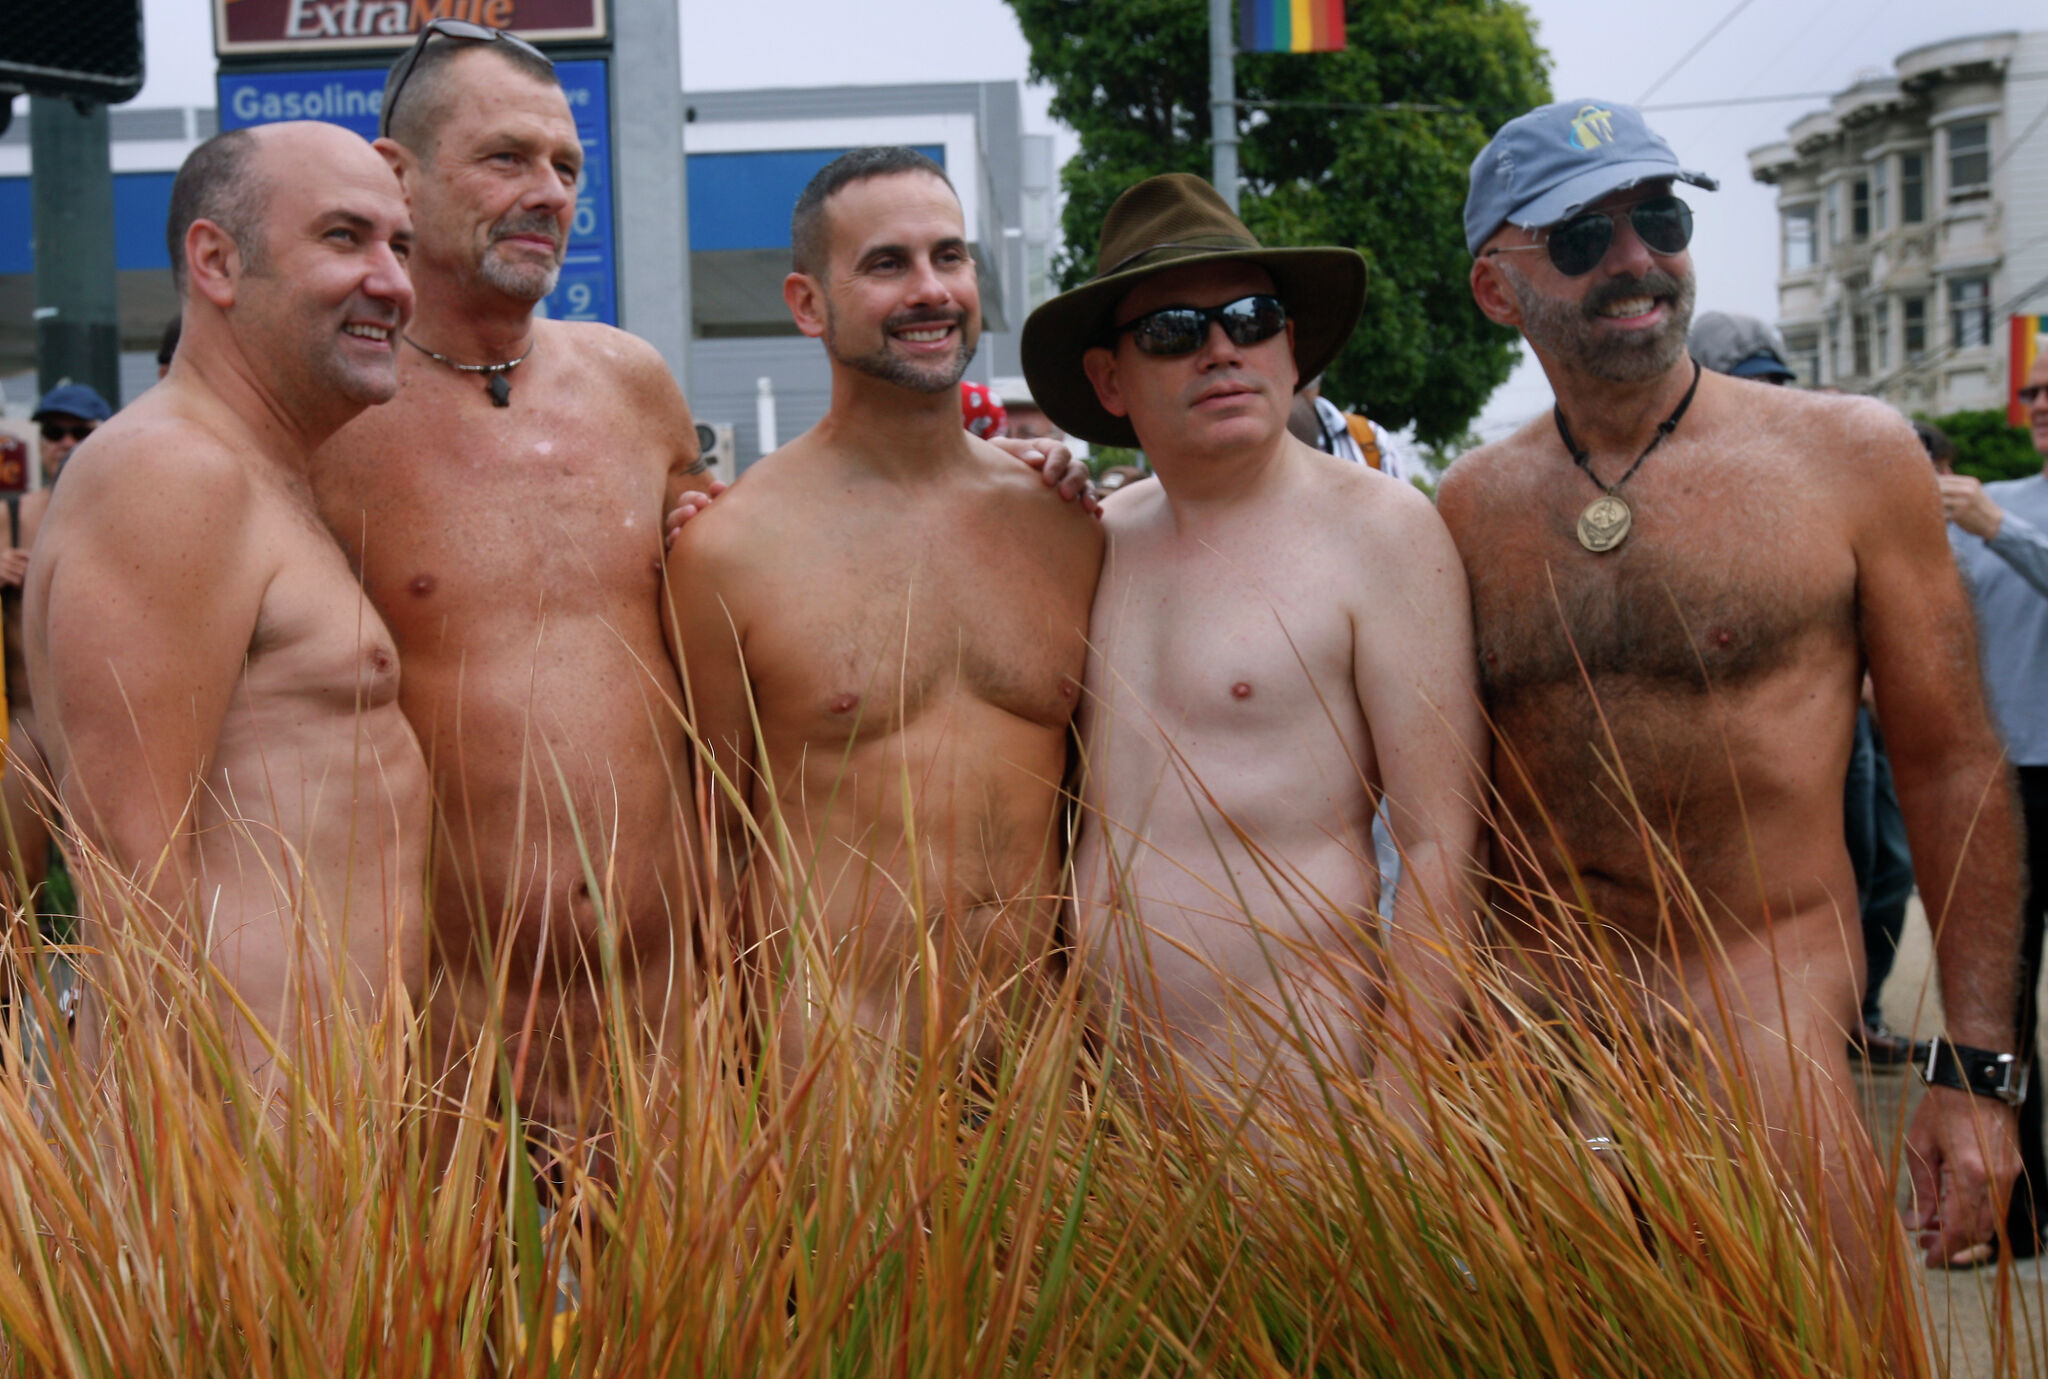 9 places where its legal to be nude in San Francisco pic